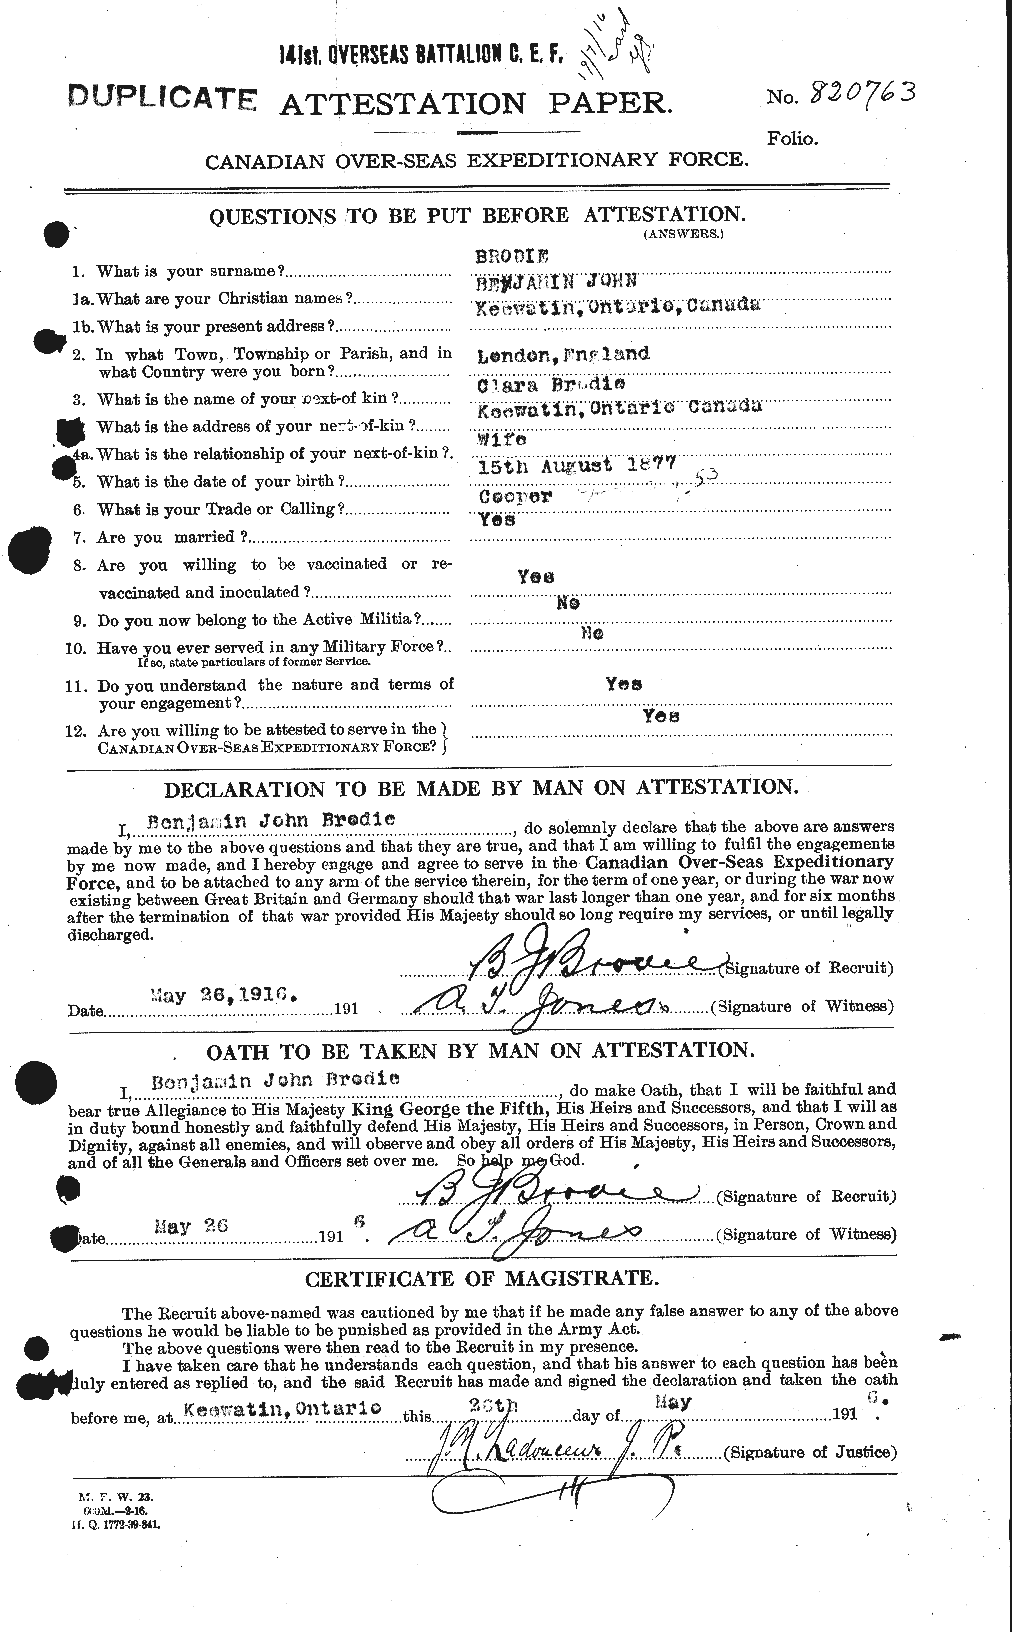 Personnel Records of the First World War - CEF 261069a